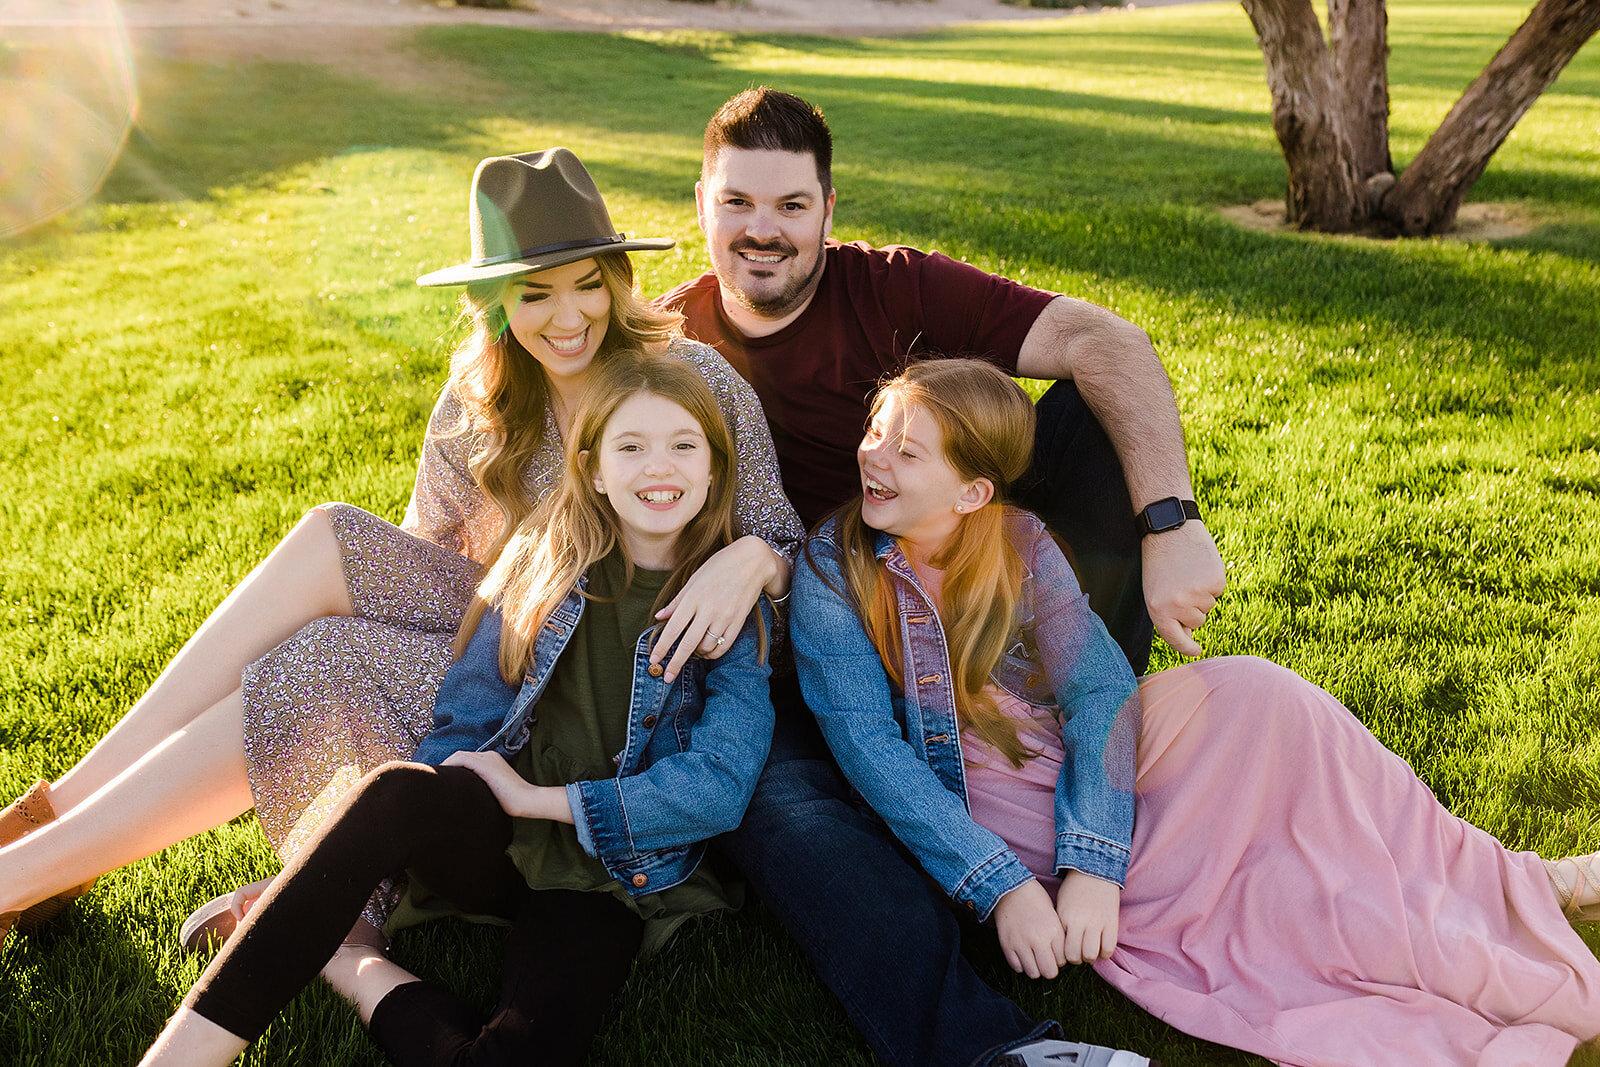 Family photo with a mom, dad, and two daughters on a grassy field